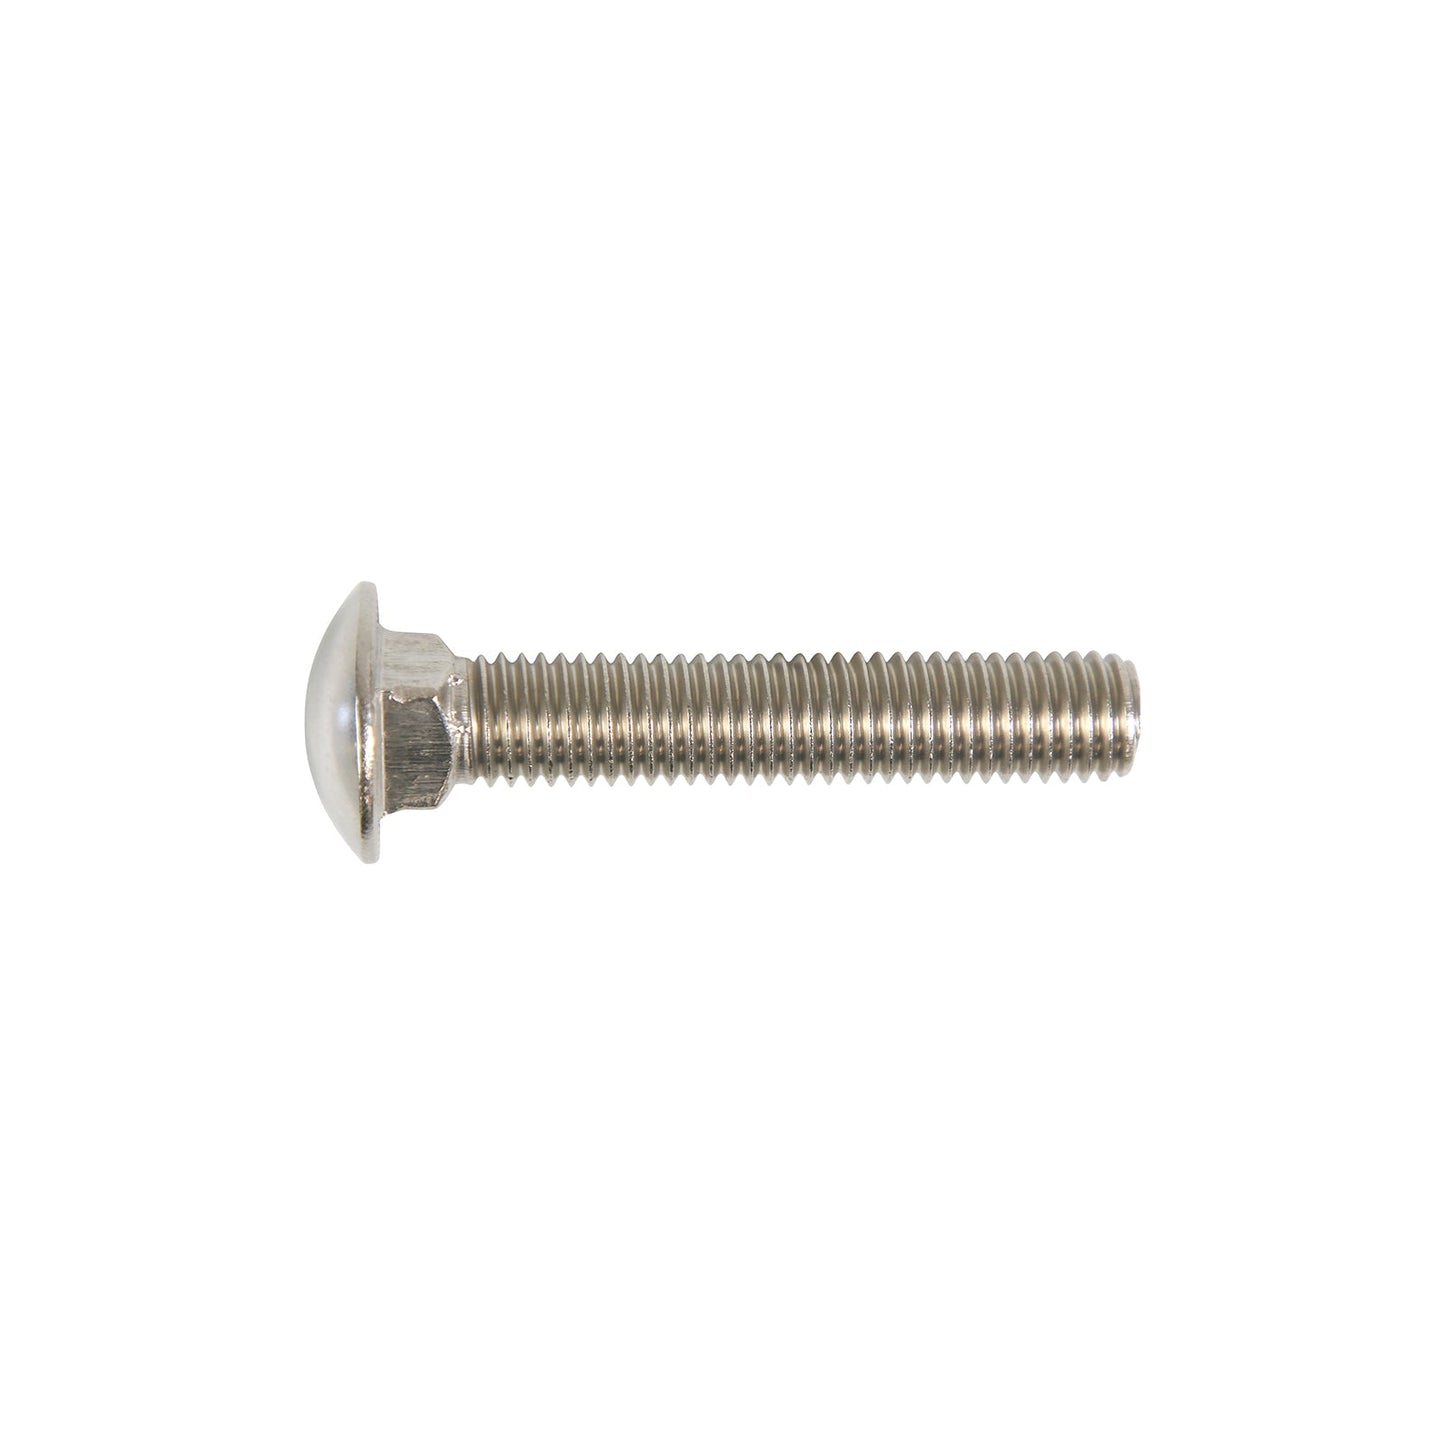 5/8"-11 x 3-1/2" Conquest Carriage Bolt - 316 Stainless Steel